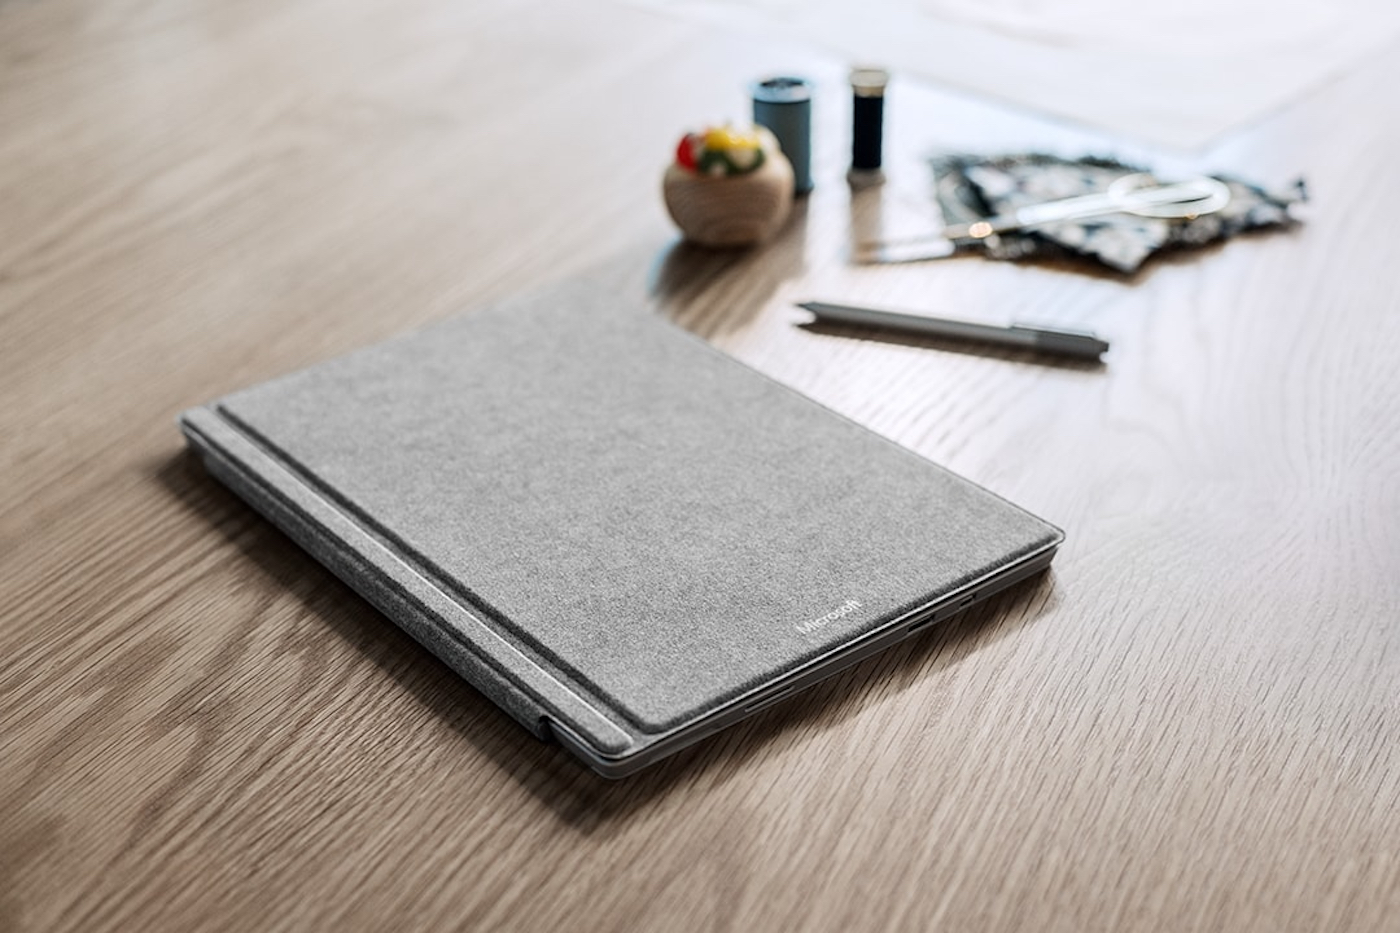 Microsoft&#039;s Surface Pro 4 gets a luxurious Type Cover